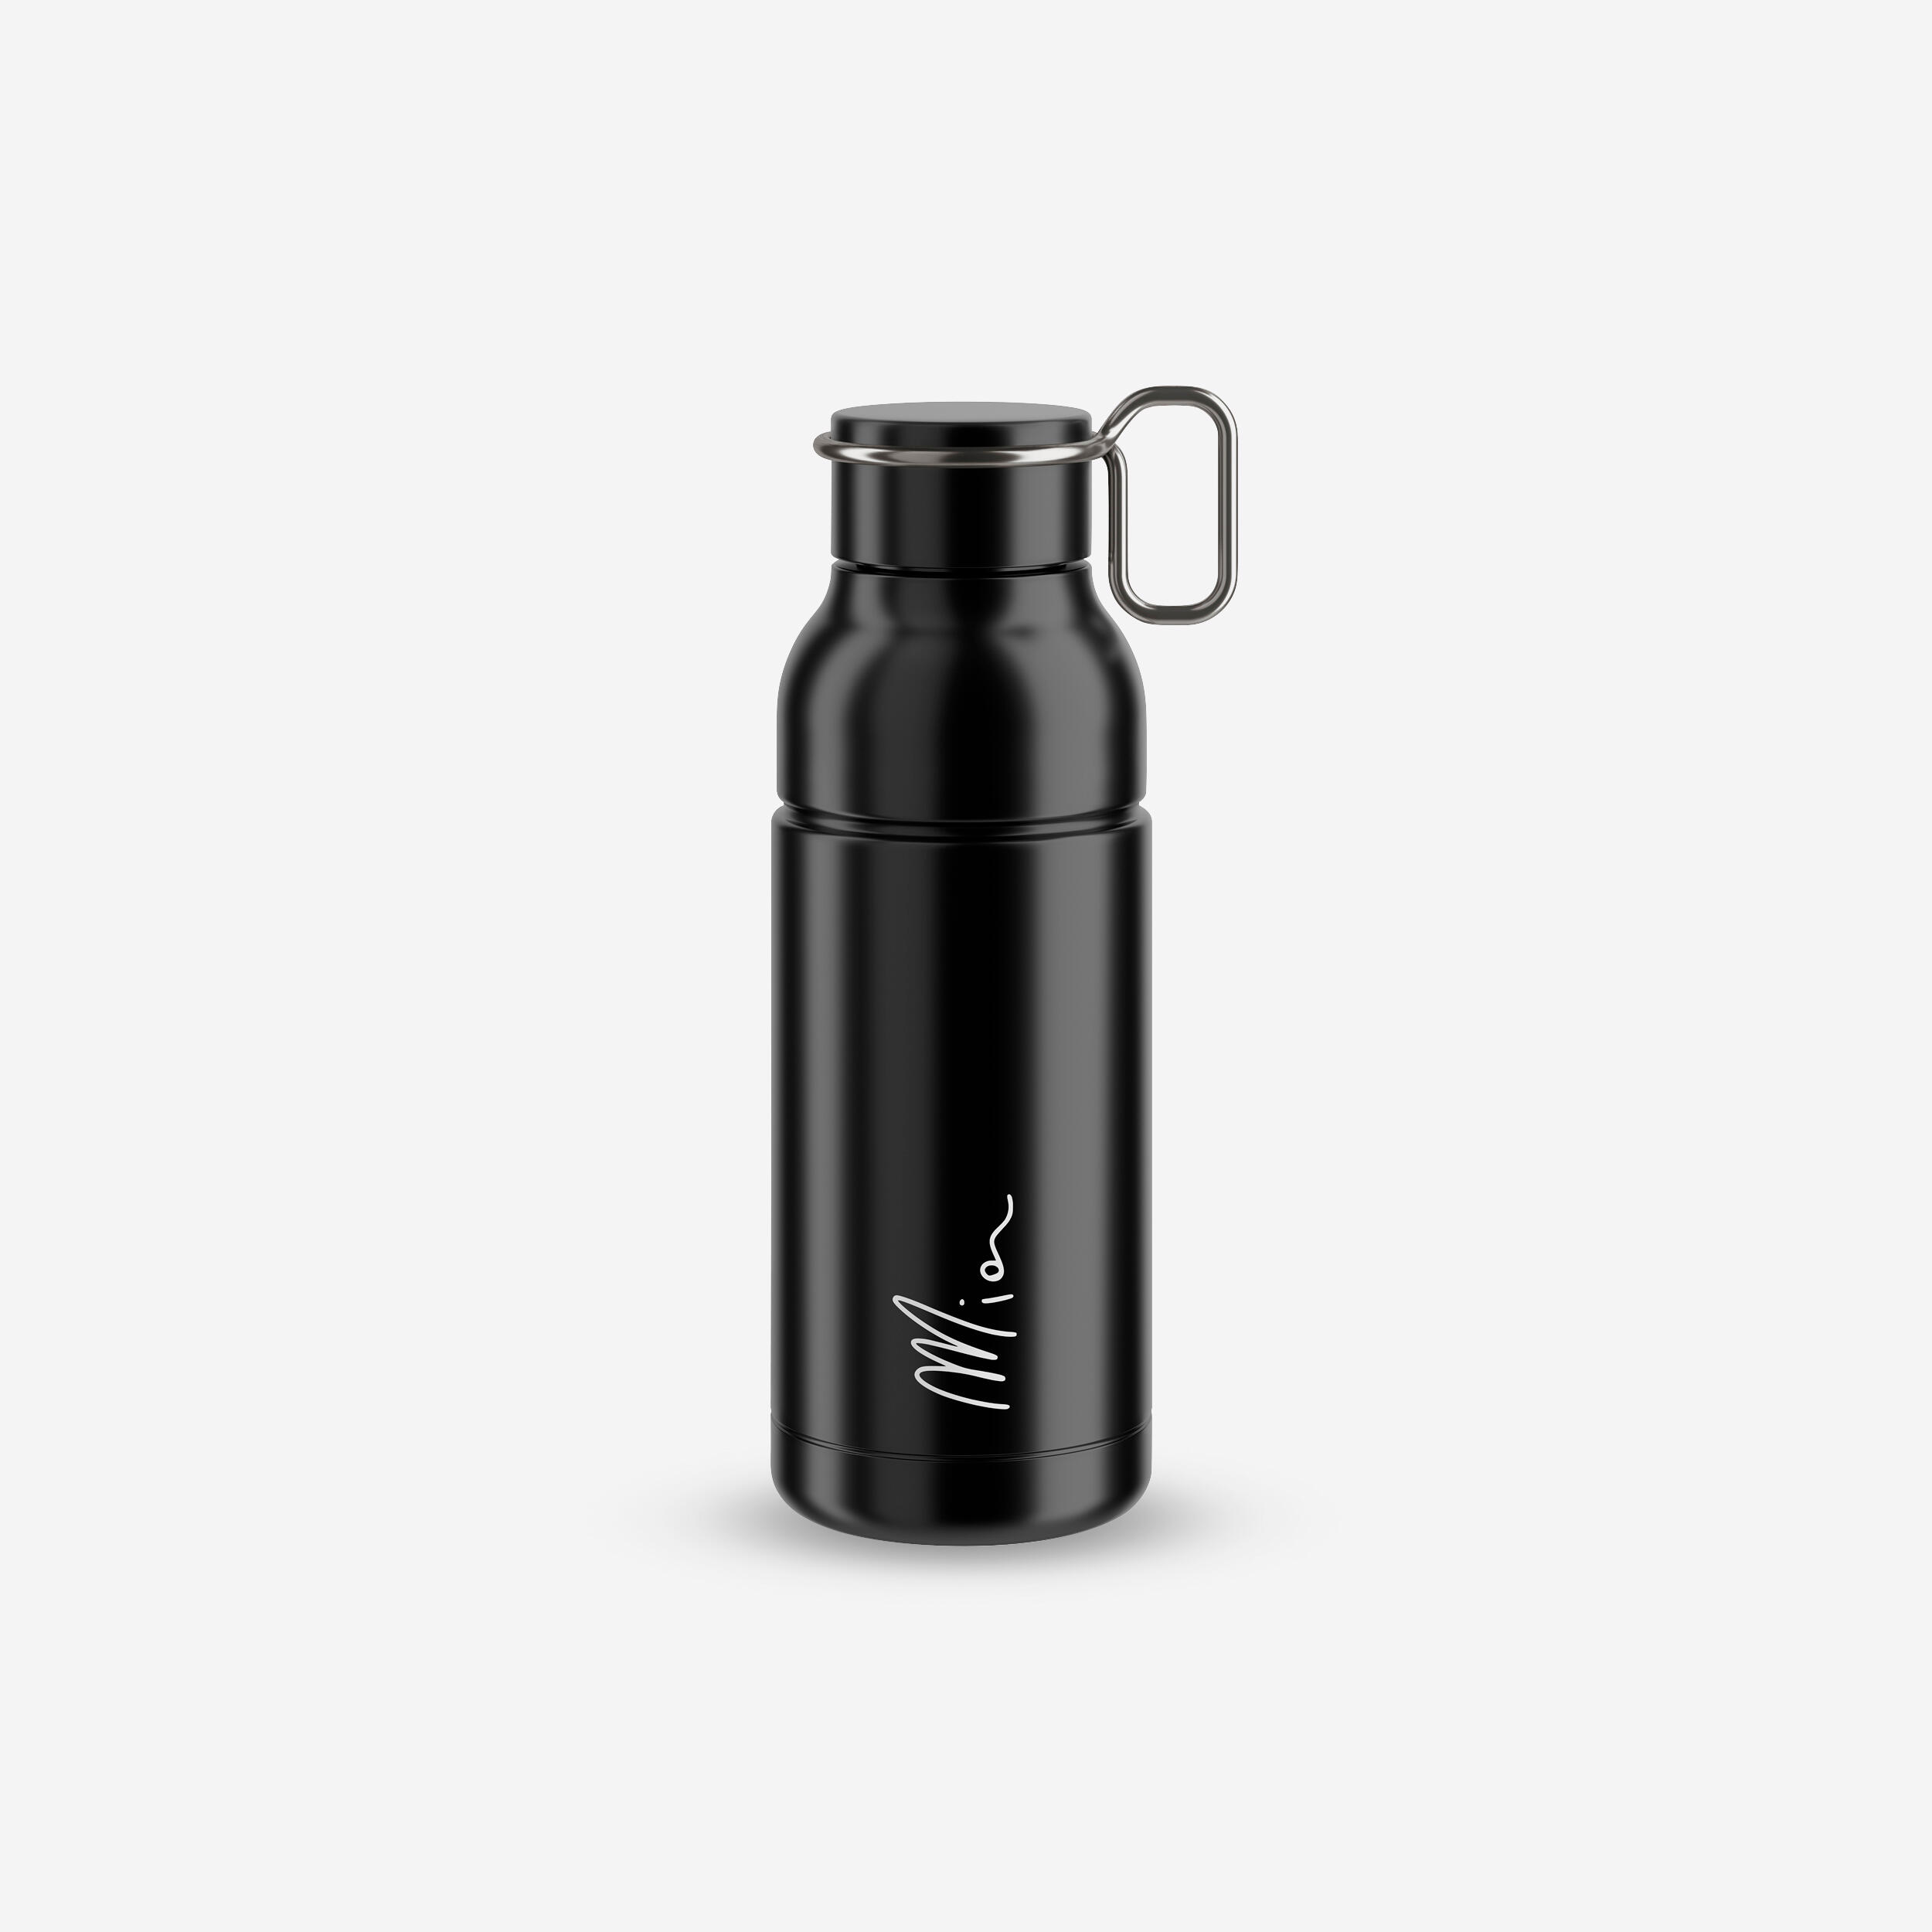 Stainless Steel Cycling Water Bottle 650 ml Mia - Black 1/4